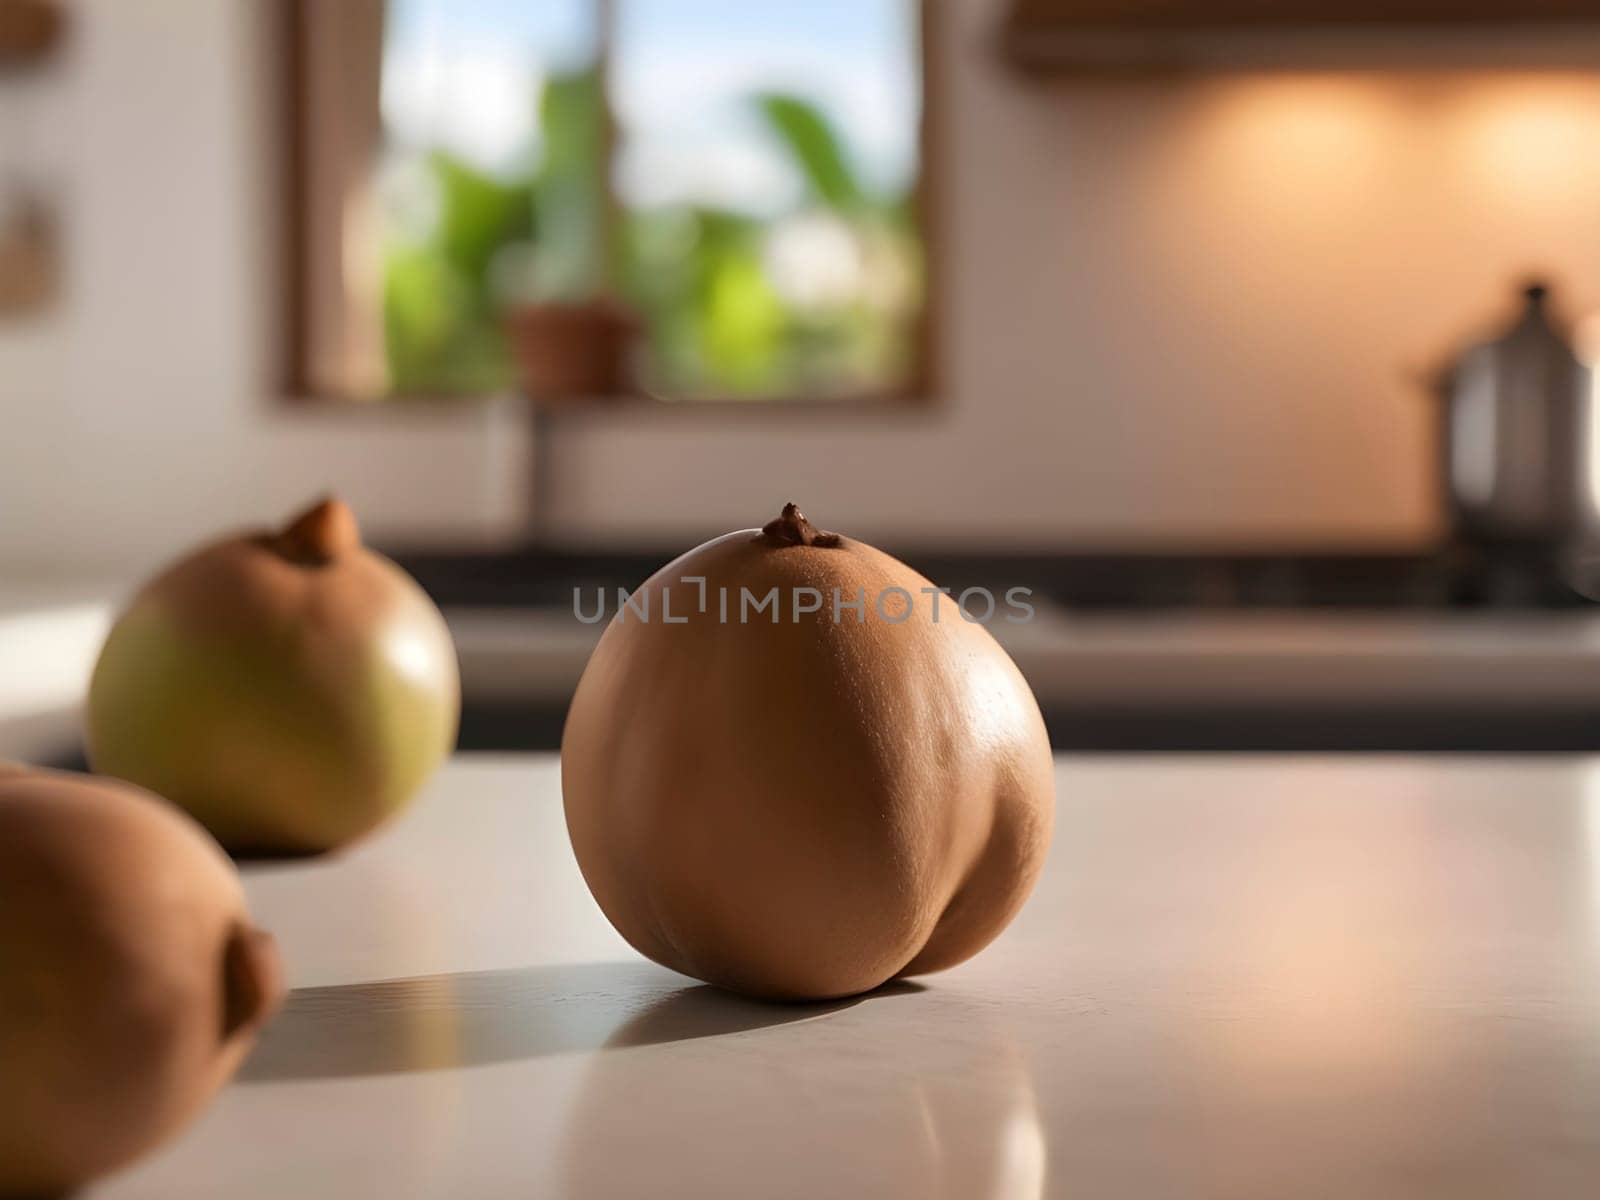 Golden Hour Delight: Sapodilla Fruit in Focus, Kitchen Bathed in Afternoon Warmth.